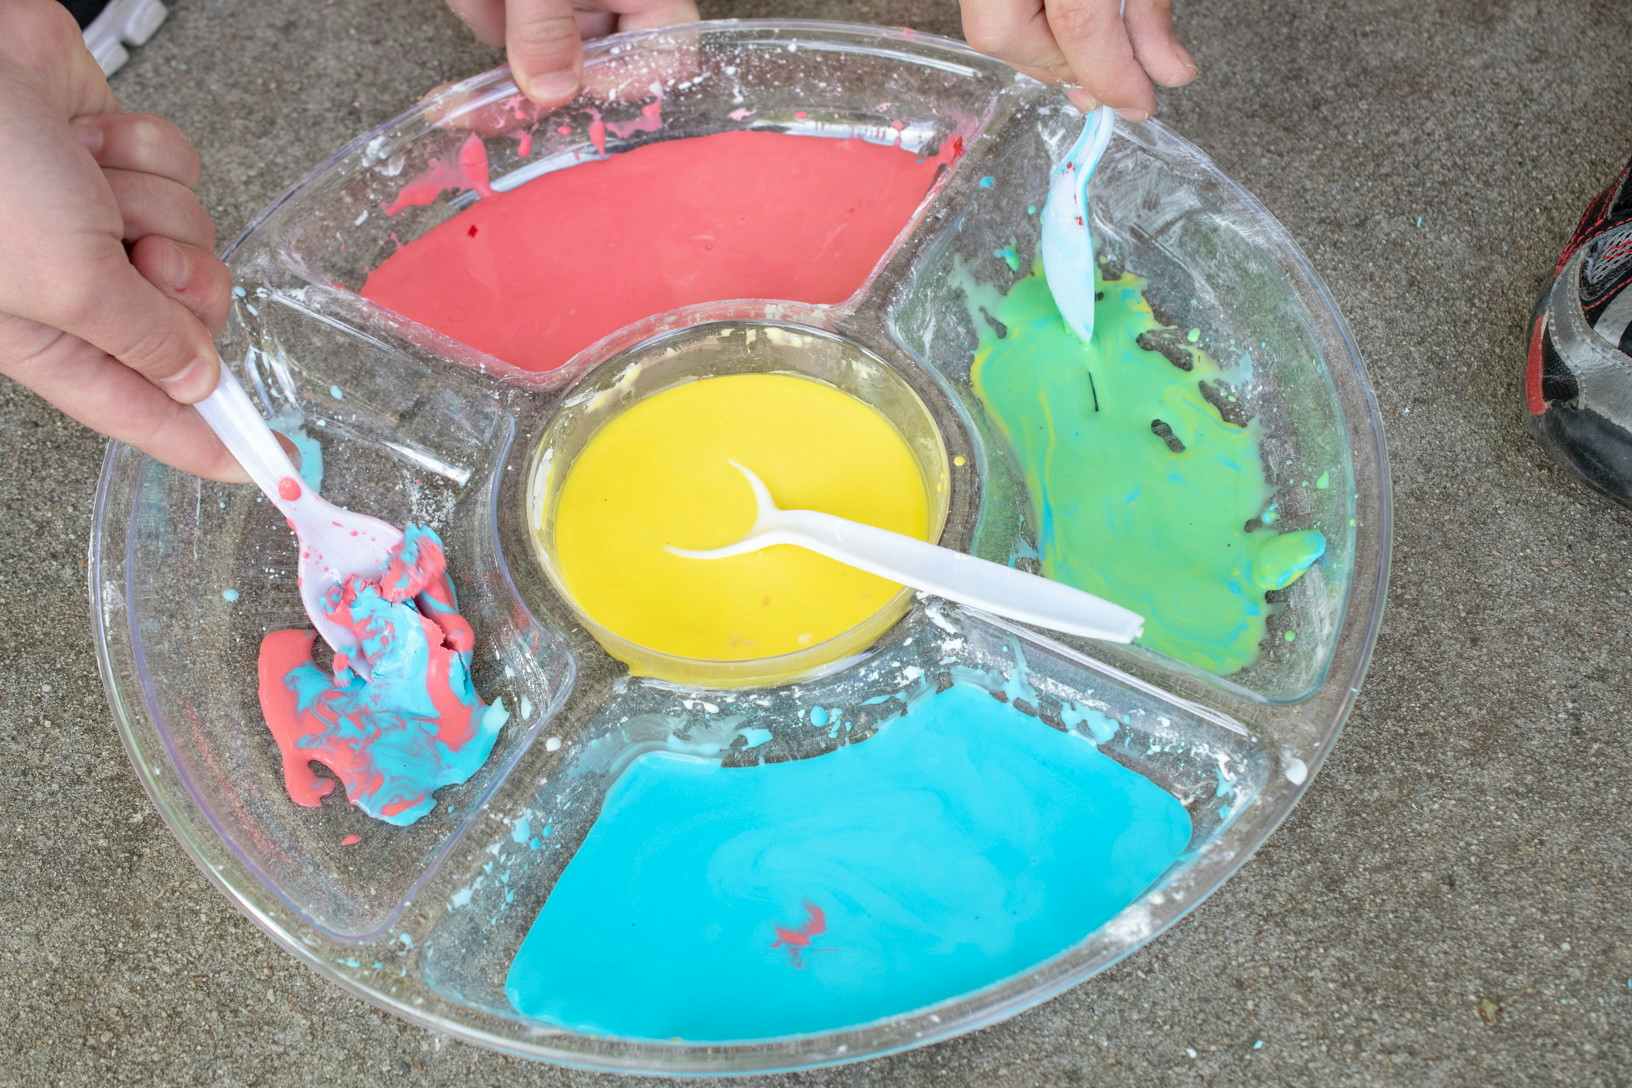 A person's hand using a spoon to mix paint in a repurposed vegetable tray, each compartment with a different color of paint.